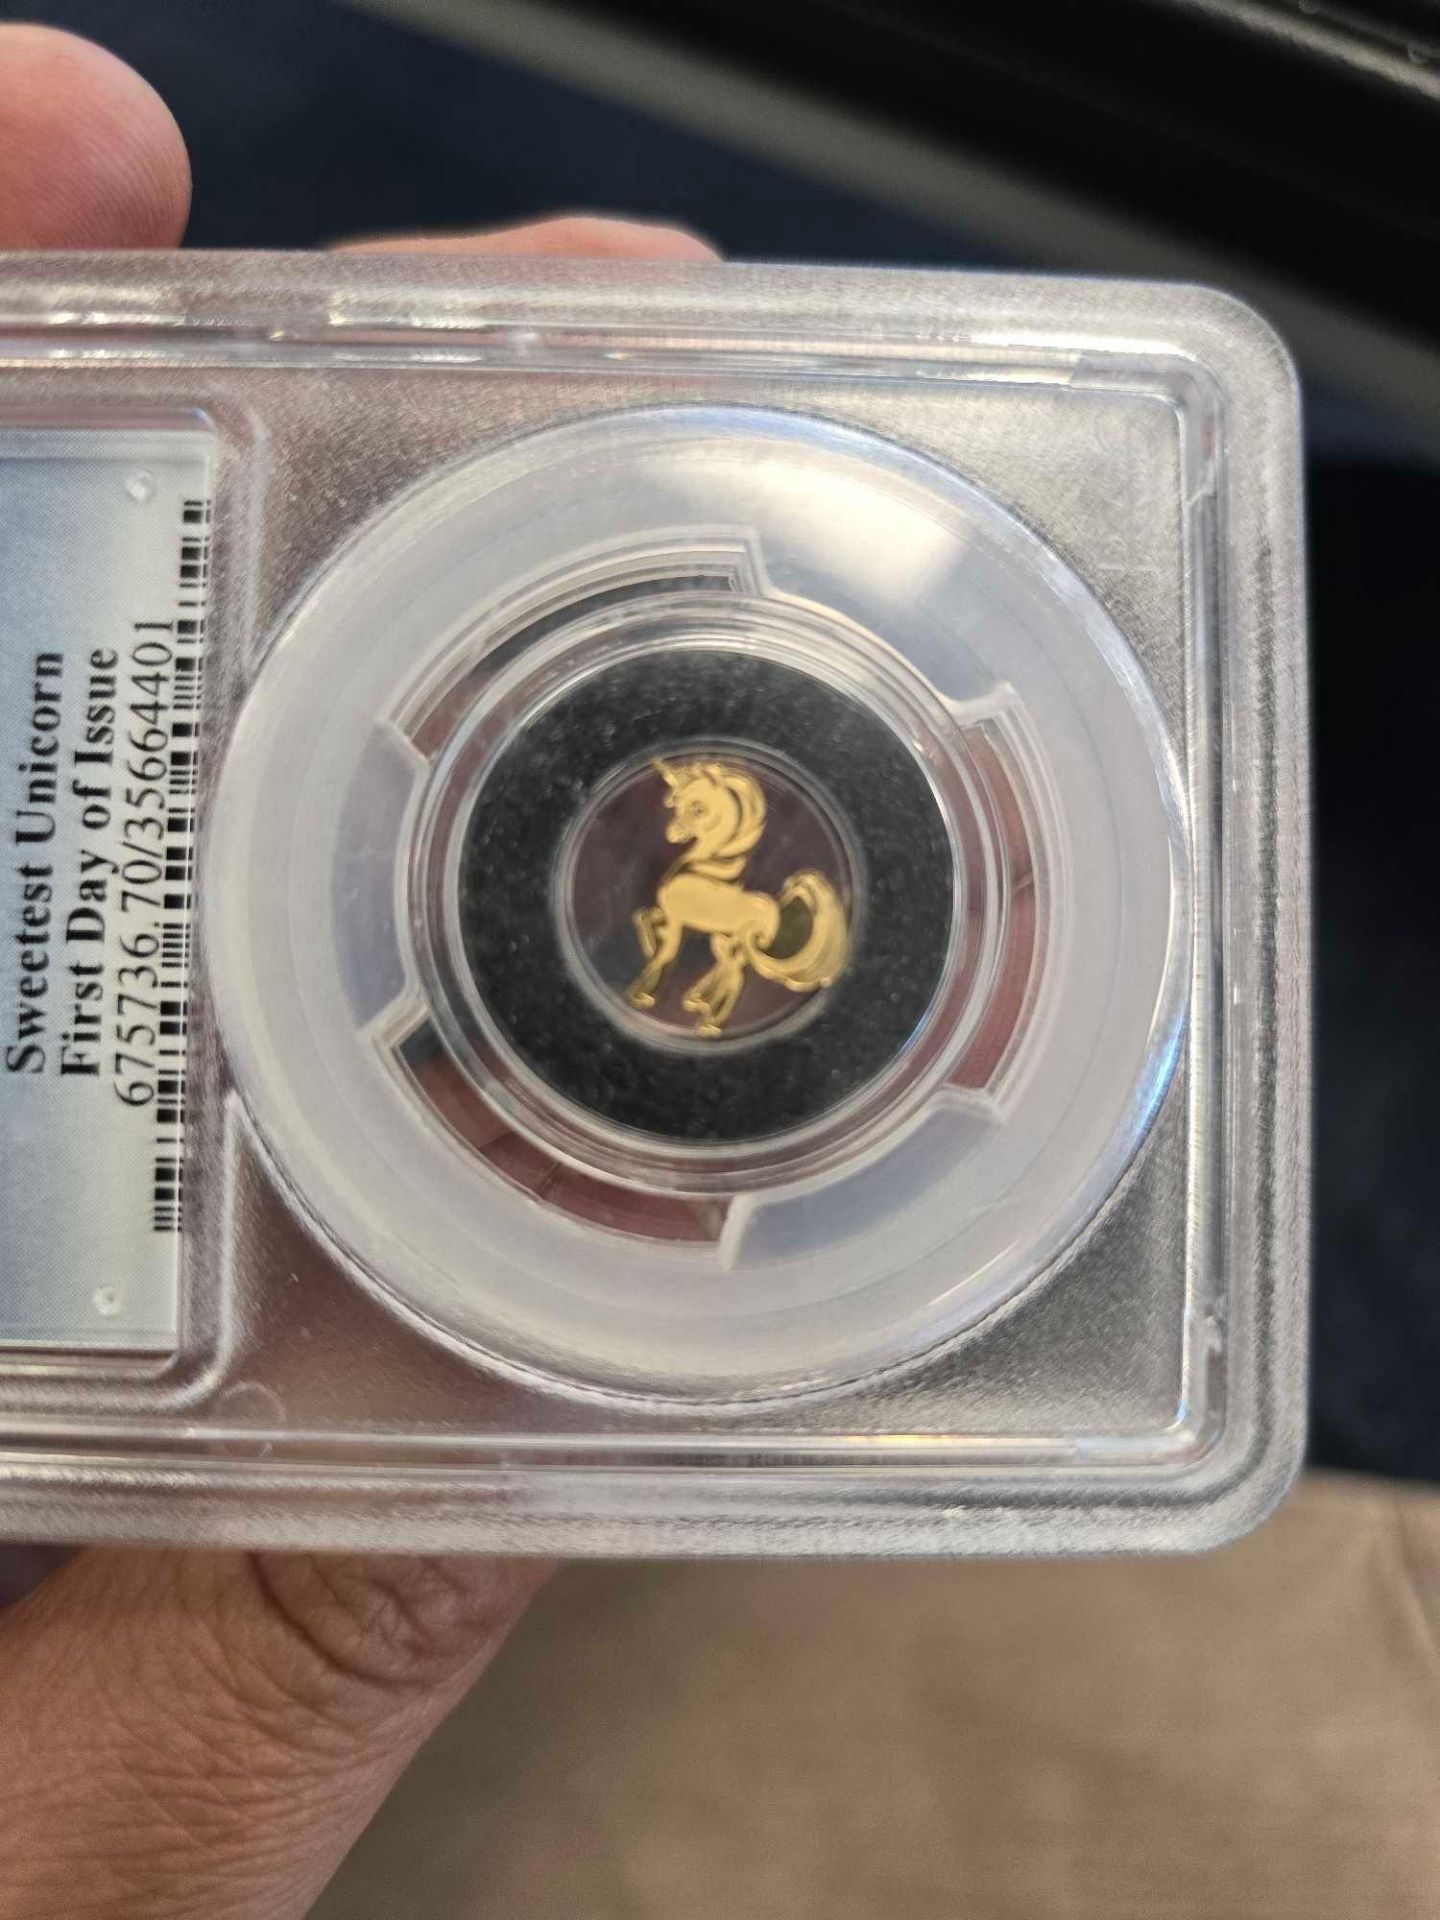 2018 Gold Palau Sweetest Unicorn Figural $1 Coin PCGS MS70 1st Day SINGLE FINEST - Image 2 of 5